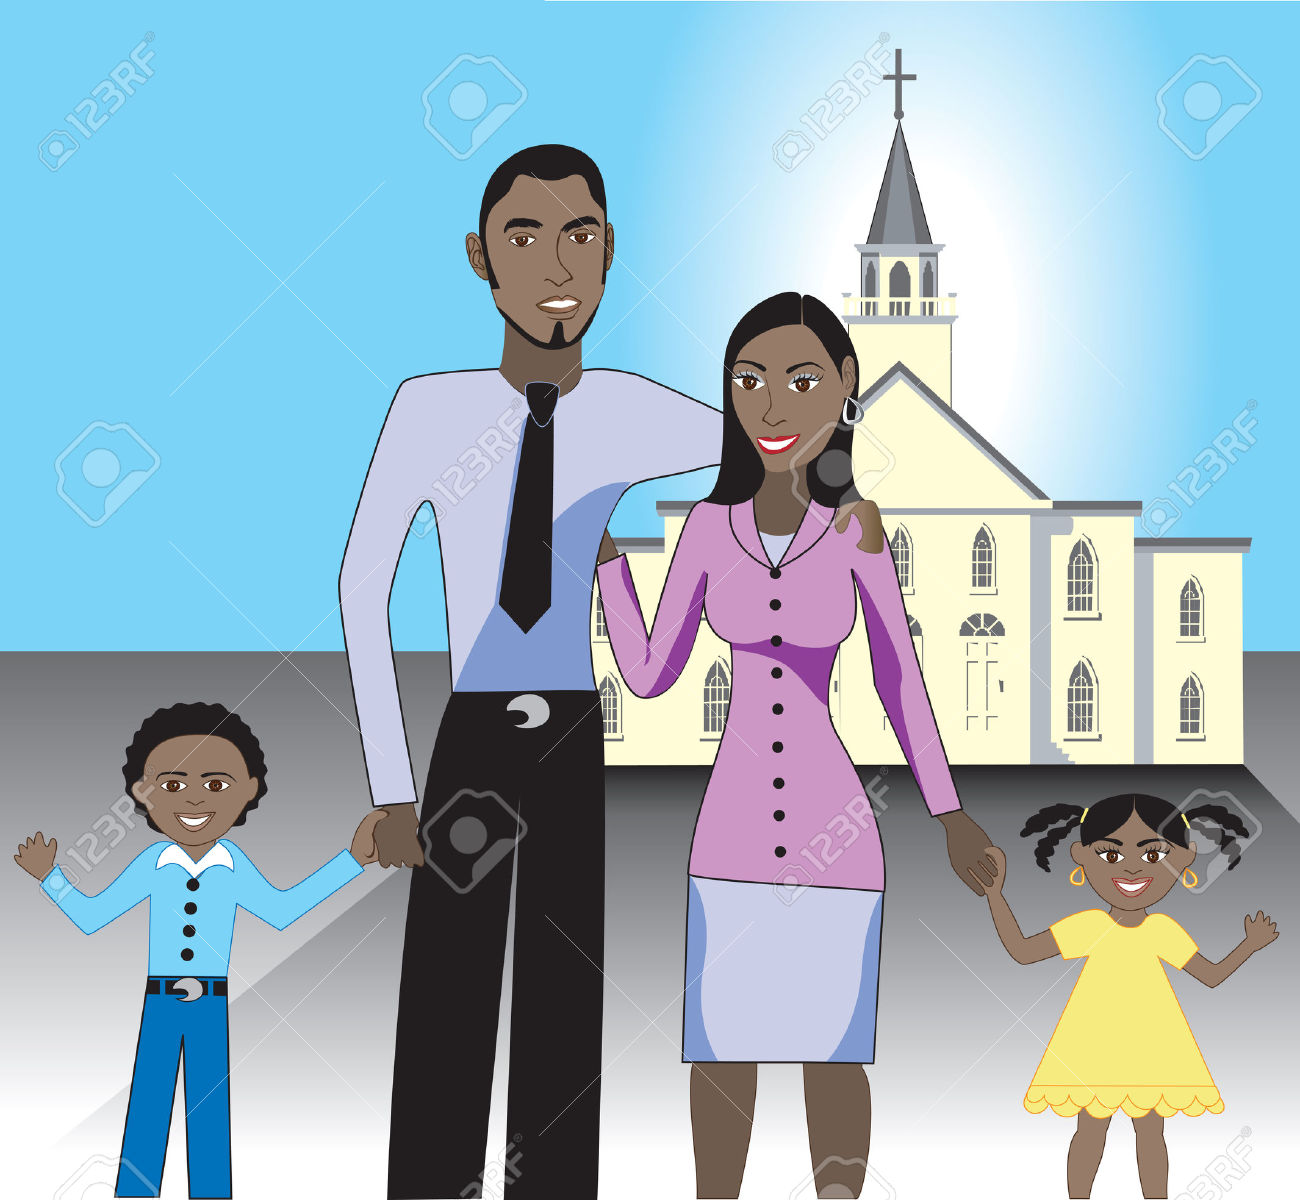 free clipart of family at church - photo #31